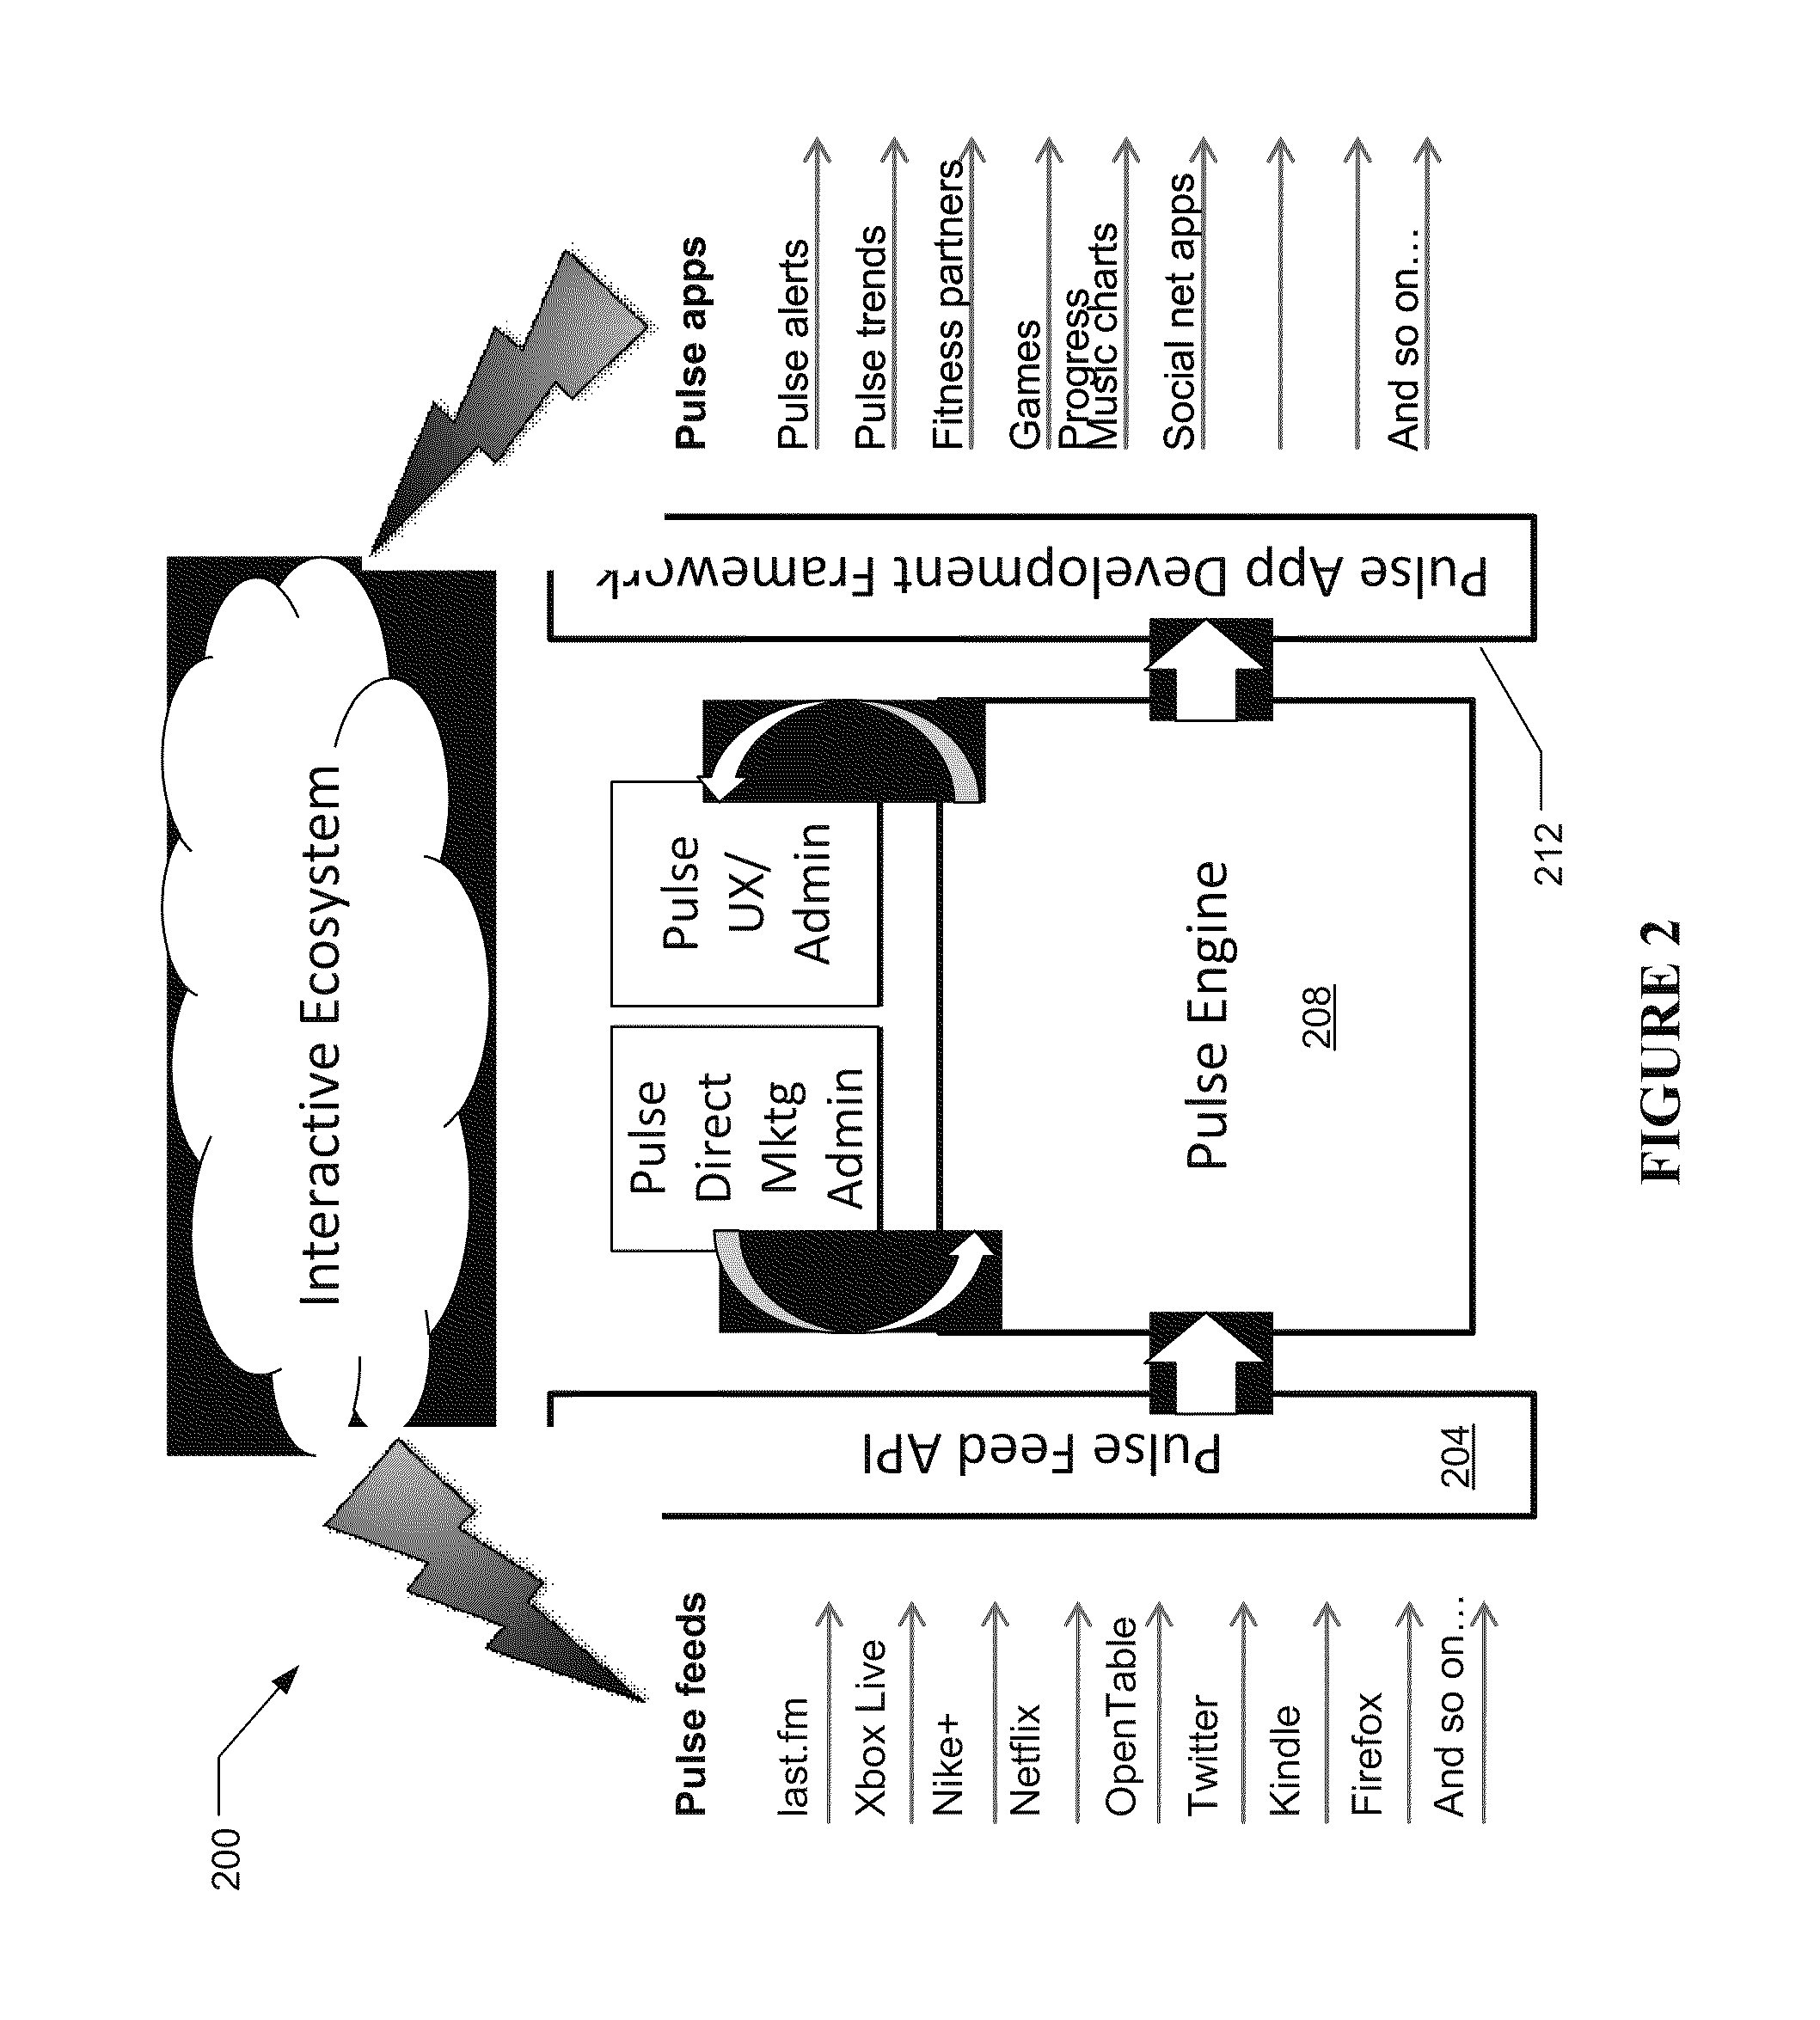 Systems and methods for generating user entertainment activity profiles